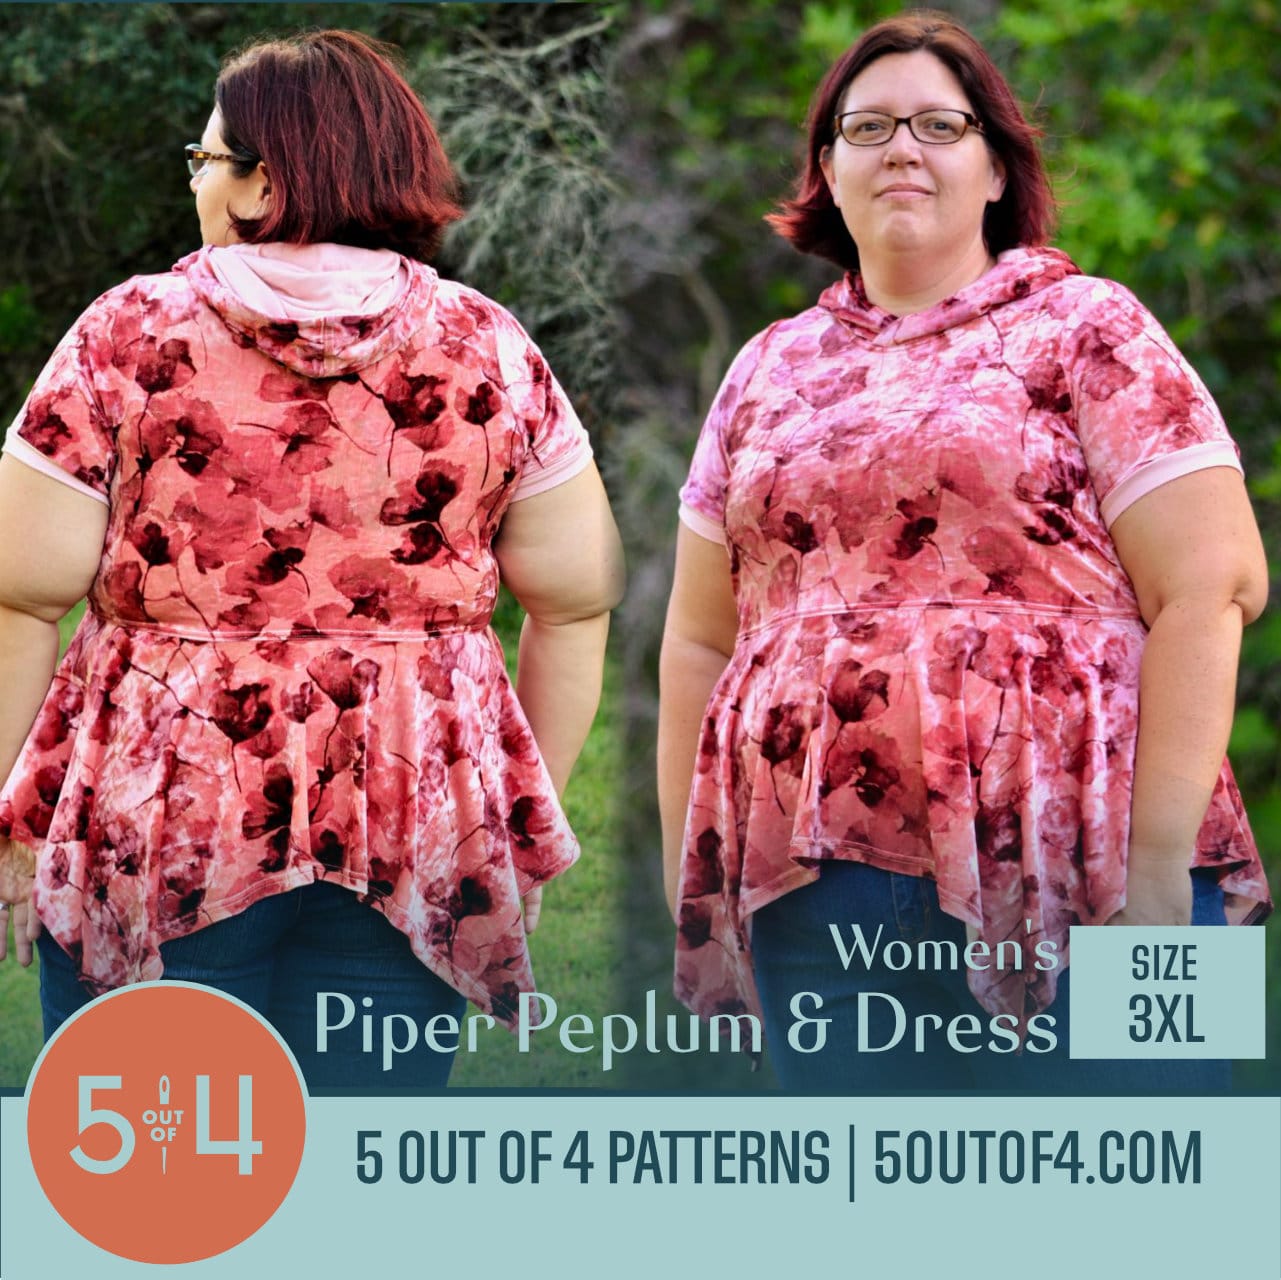 Piper Peplum and Dress - 5 out of 4 Patterns